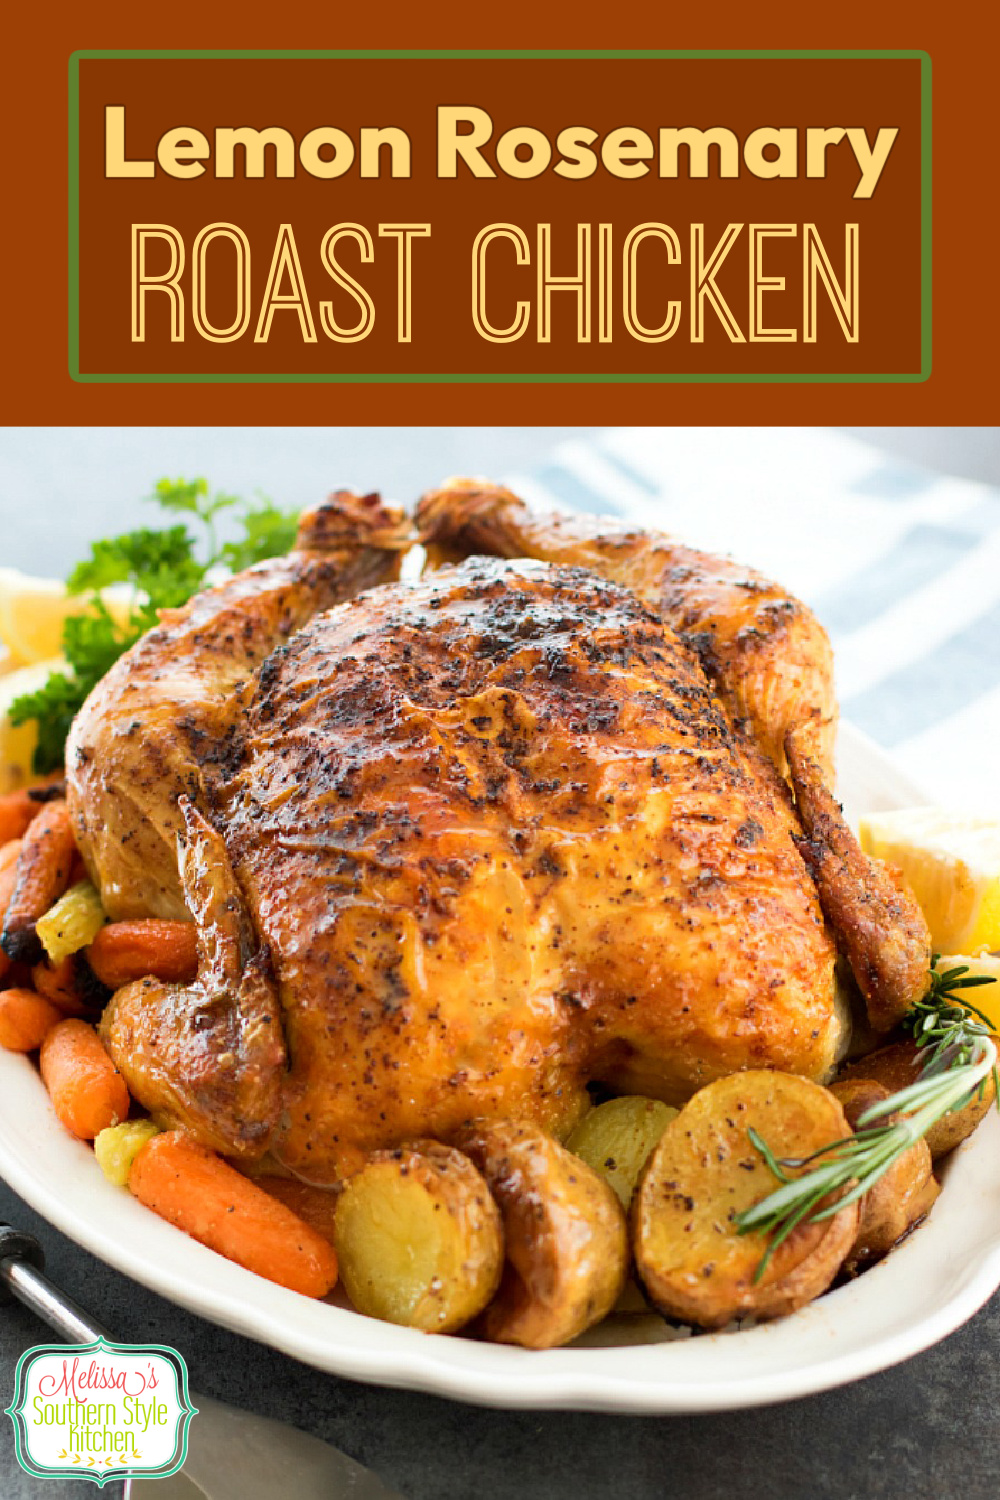 You can enjoy this Lemon Rosemary Roast Chicken on the table for dinner with little fuss #roastchicken #lemonrosemaryroastchicken #easyroastchicken #bakedchicken #chickenrecipes #dinnerideas #southernfood #southernrecipes